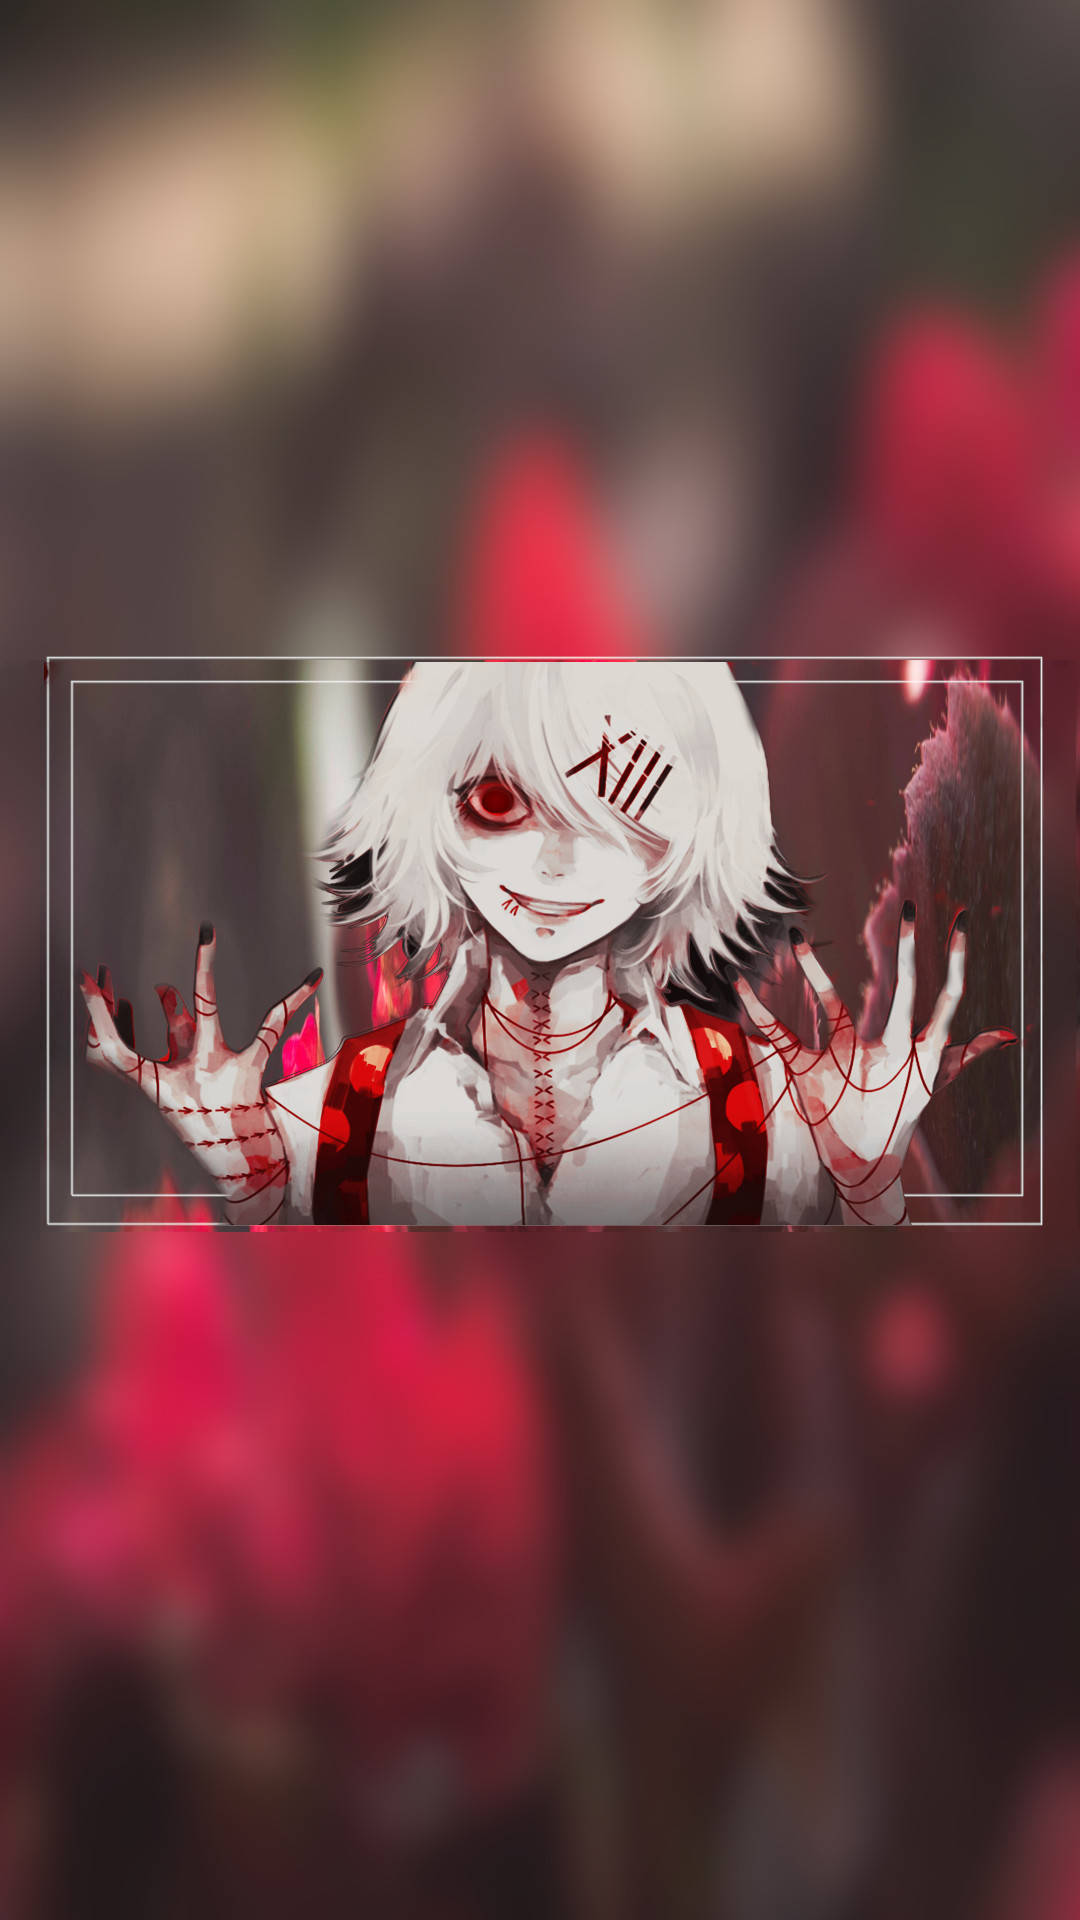 Juuzou Tokyo Ghoul 4k Playing With Red Threads Wallpaper